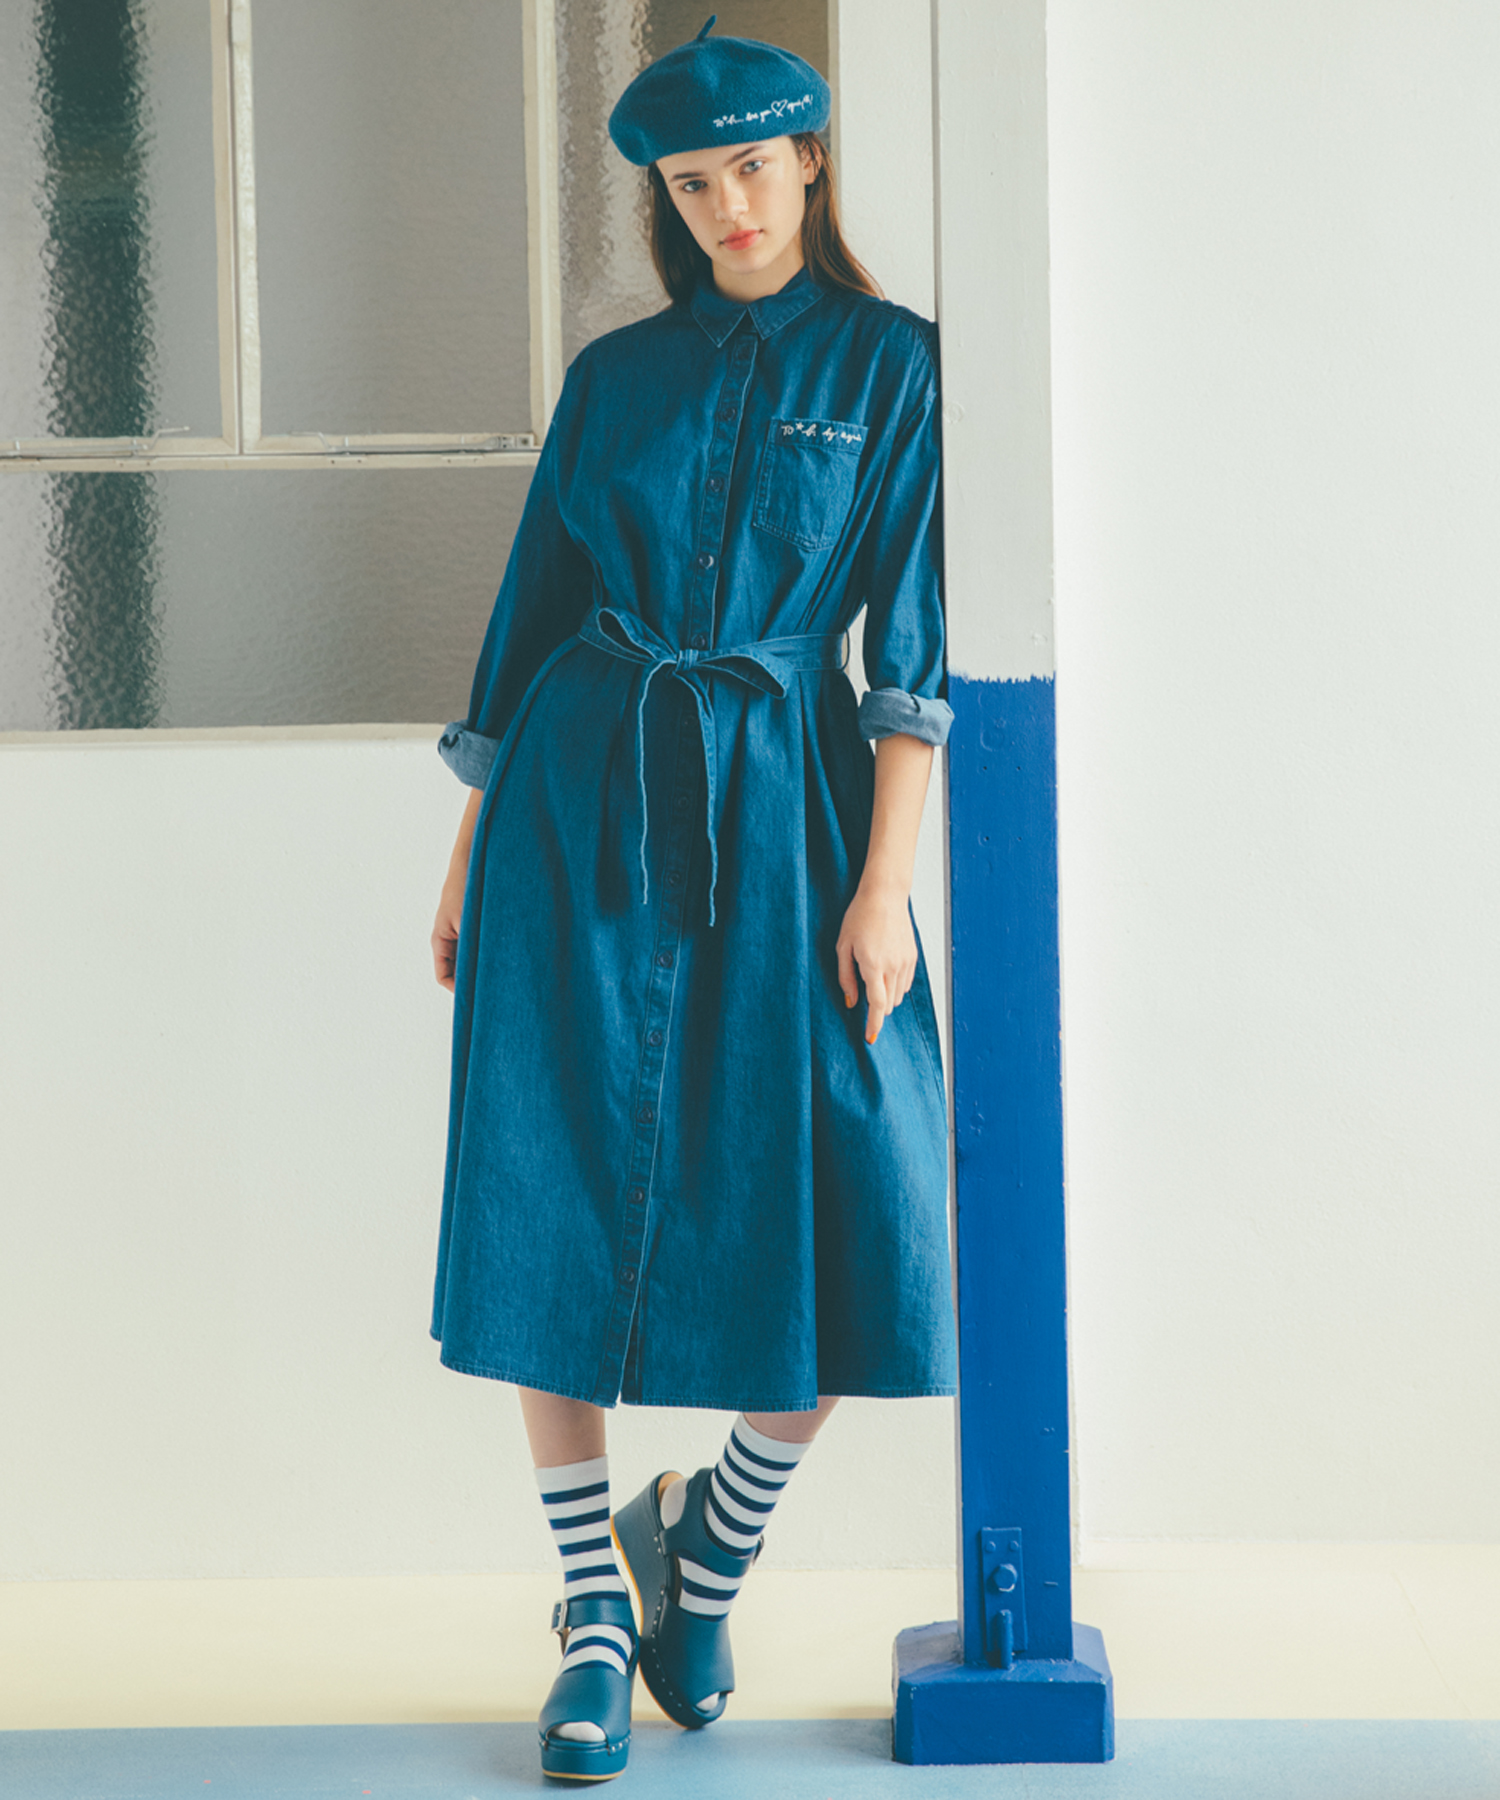 Outlet Web限定 Wg78 Robe デニムシャツワンピース To B By Agnes B アニエスベー公式通販サイト